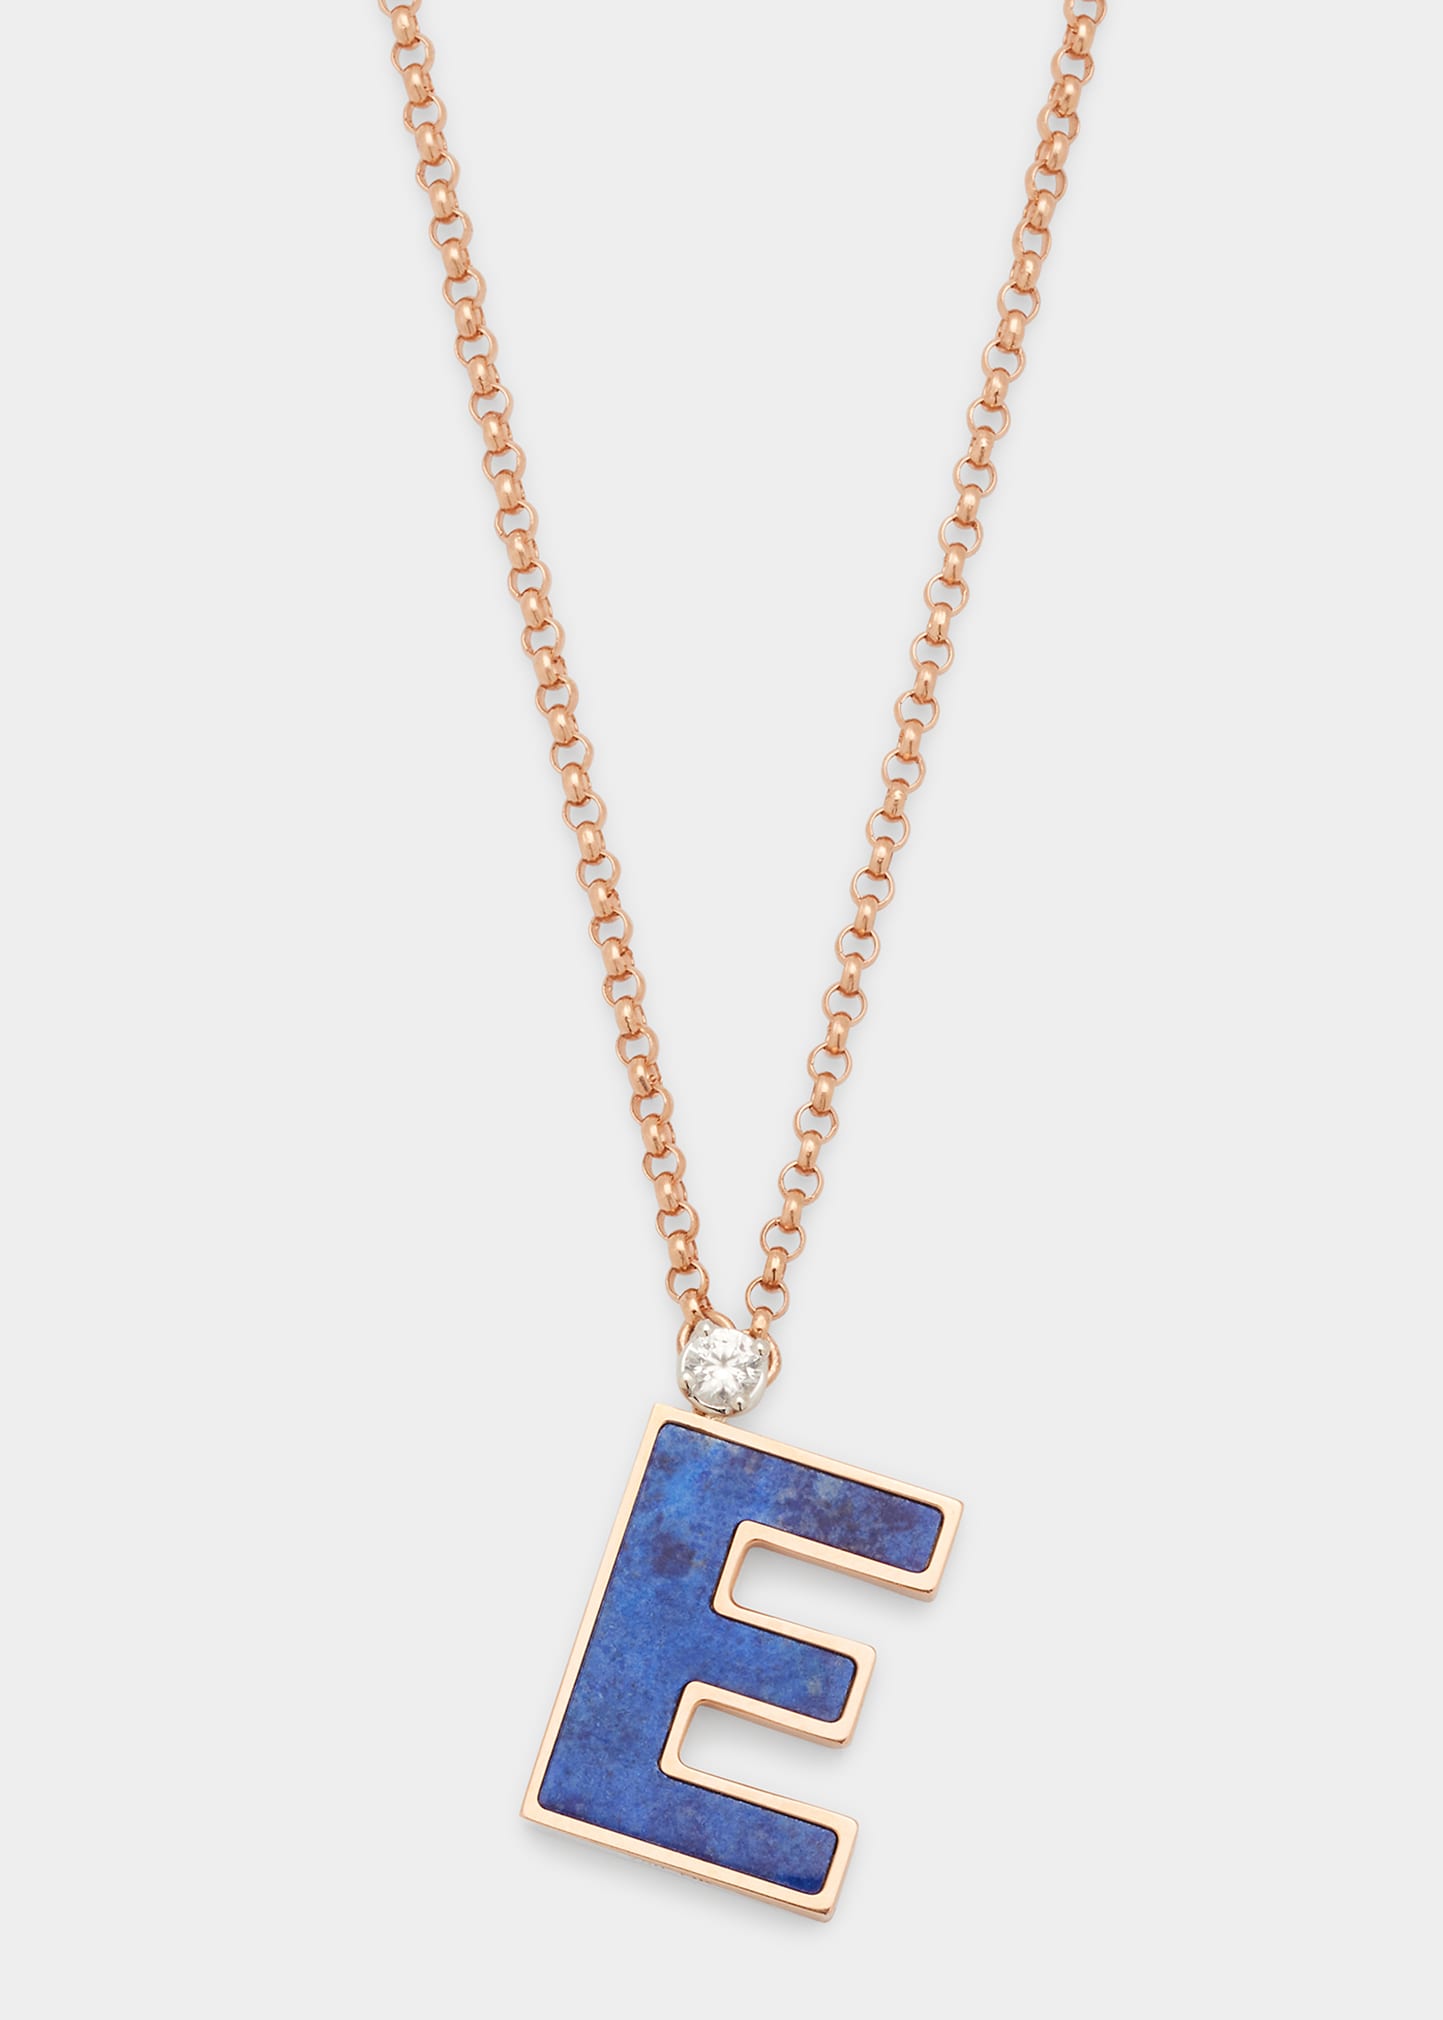 Rose Gold Letter E Charm Necklace with Lapis and White Sapphire